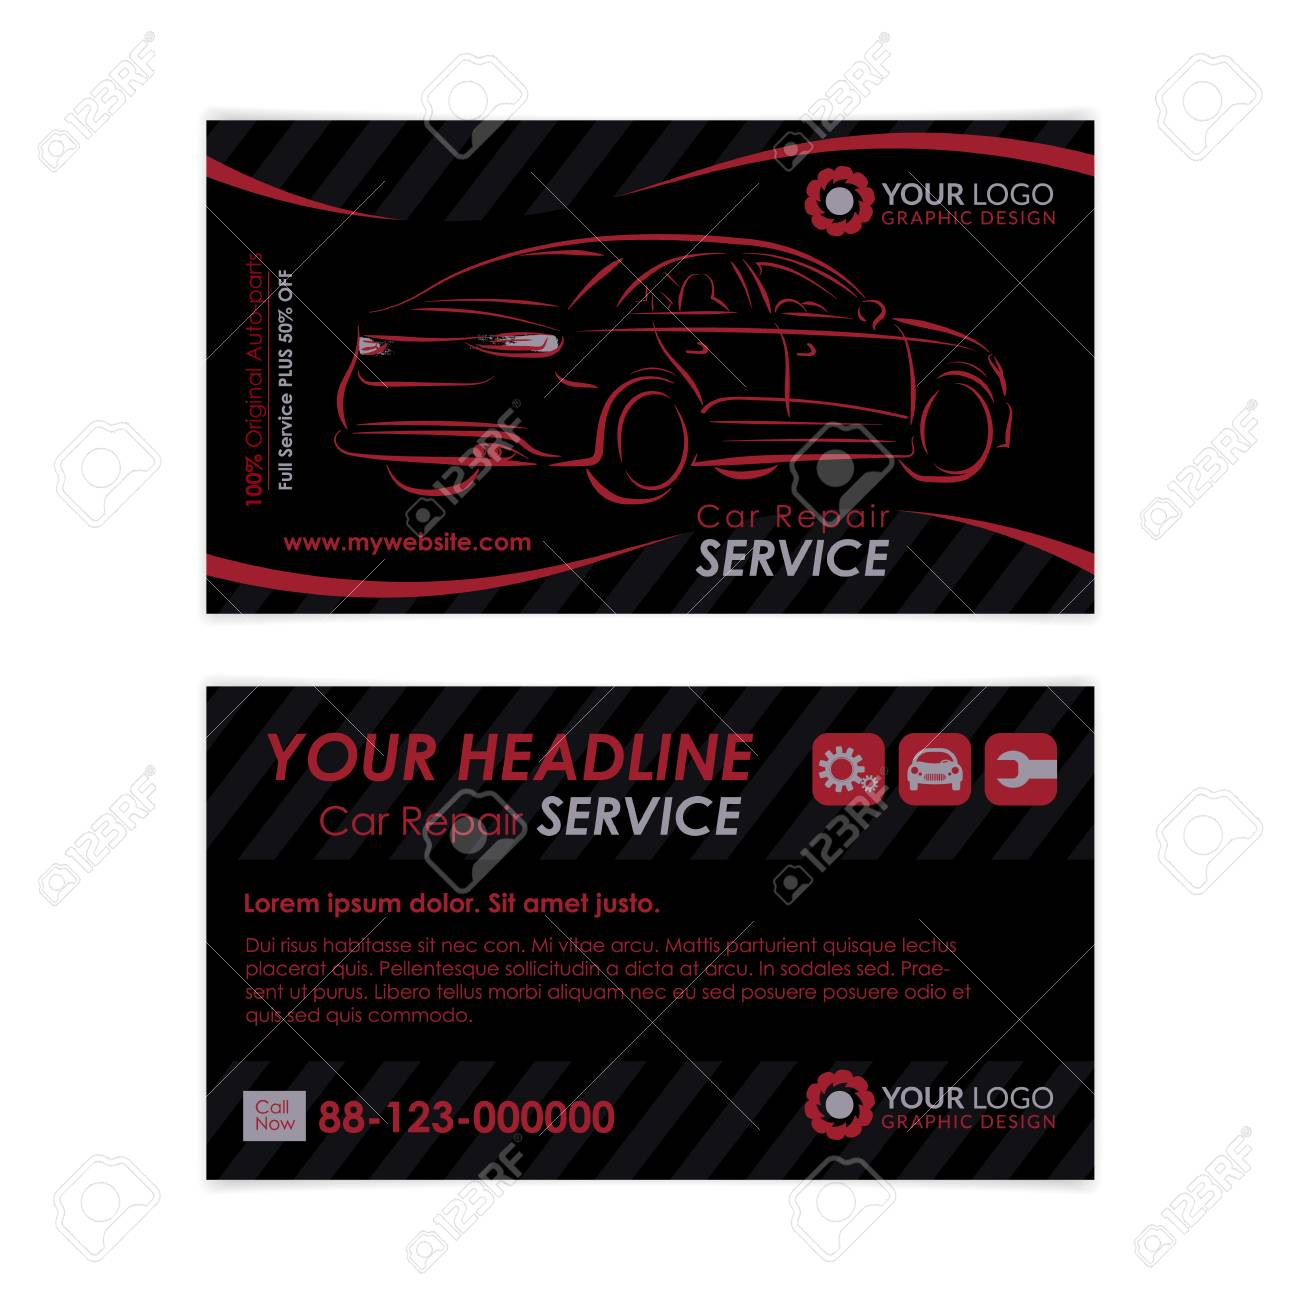 Auto Repair Business Card Template. Create Your Own Business.. Pertaining To Automotive Business Card Templates